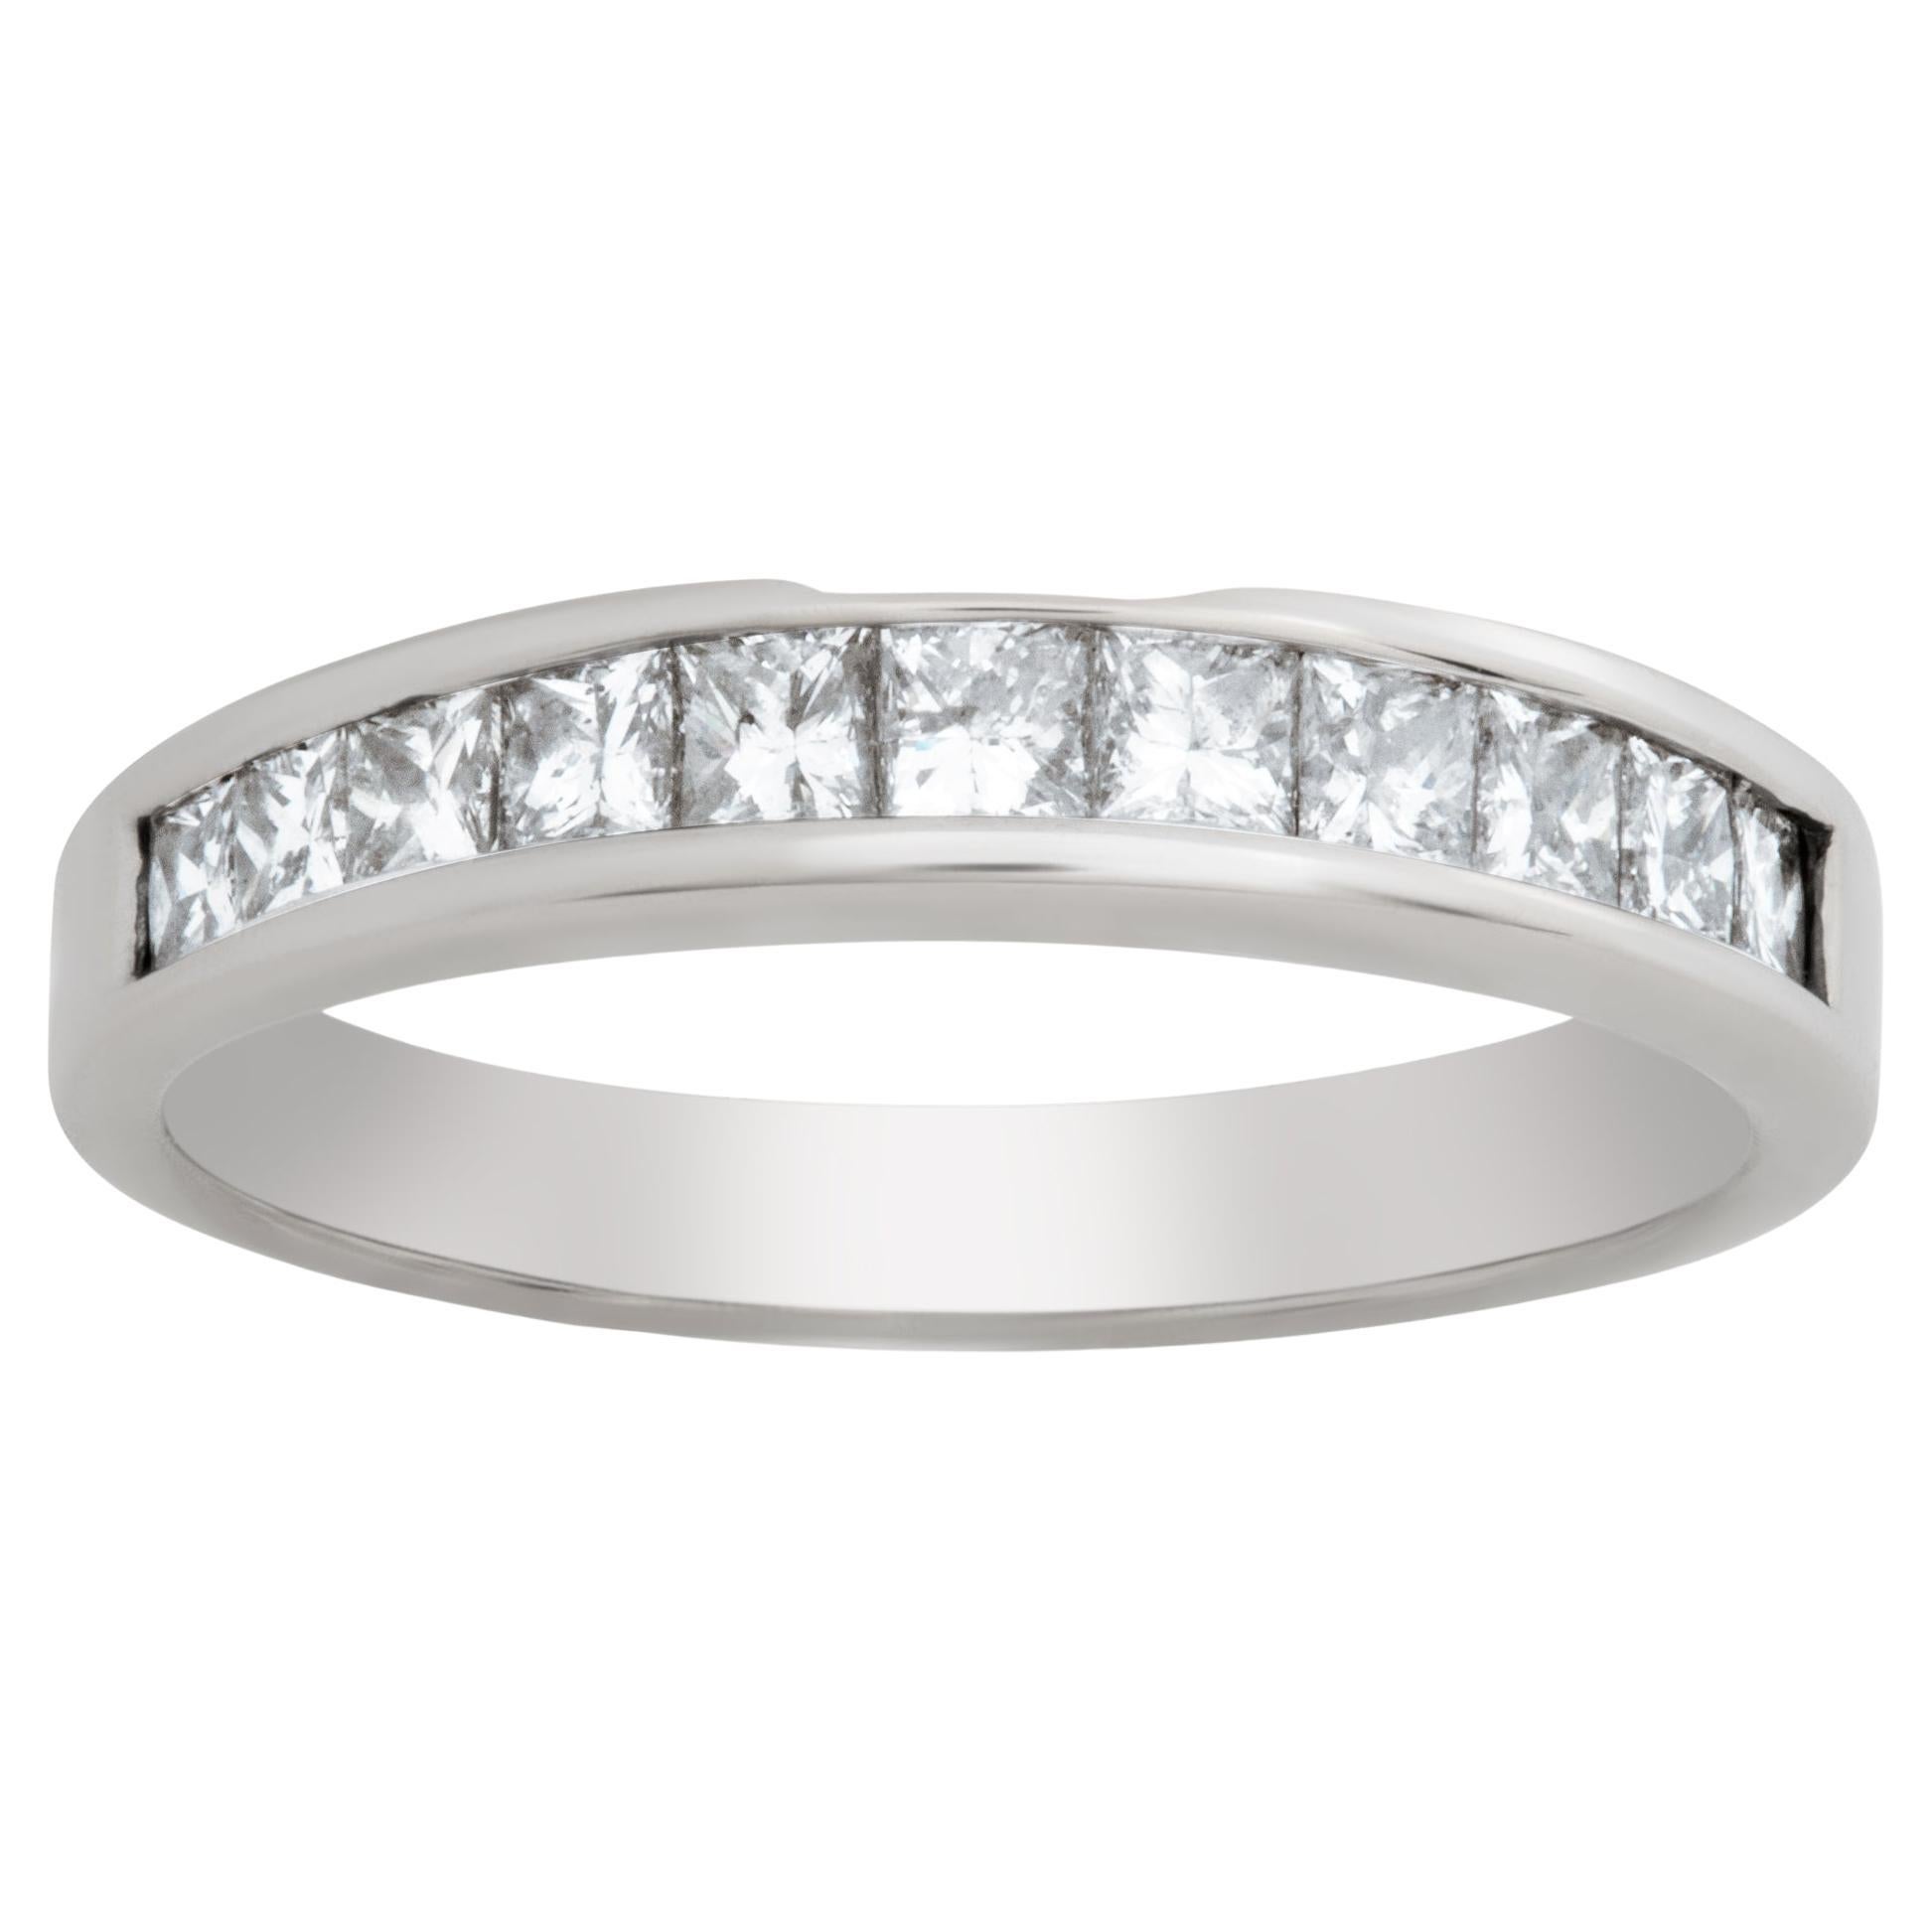 14k White Gold Diamond Semi Eternity Band and Ring with App. 1 Carat in Princess